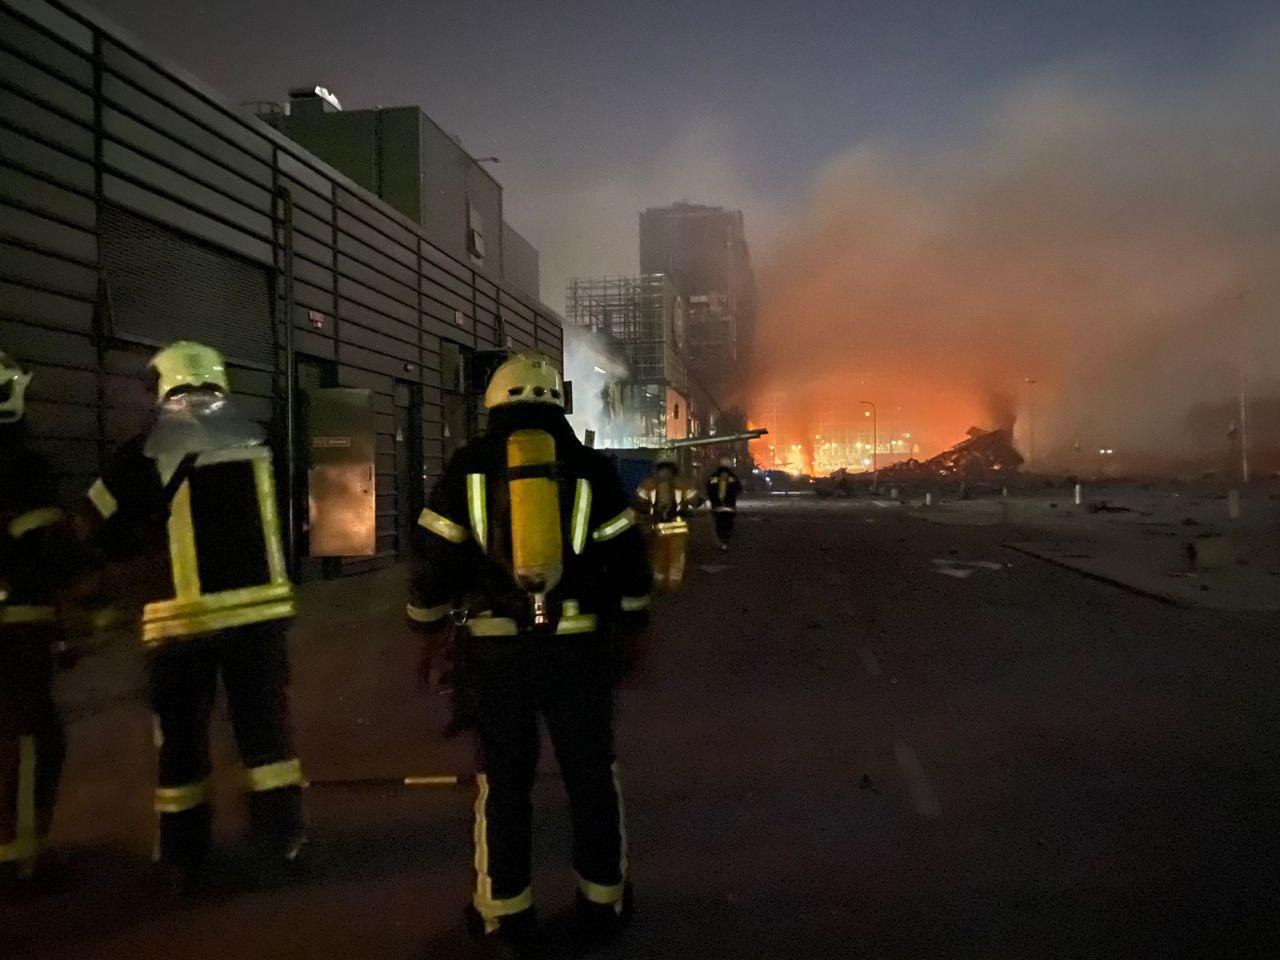 Defense Express / Several explosions took place in Kyiv. A shopping mall and a few residential buildings were damaged, caught fire / Day 25th of Ukraine's Defense Against Russian Invasion (Live Updates)